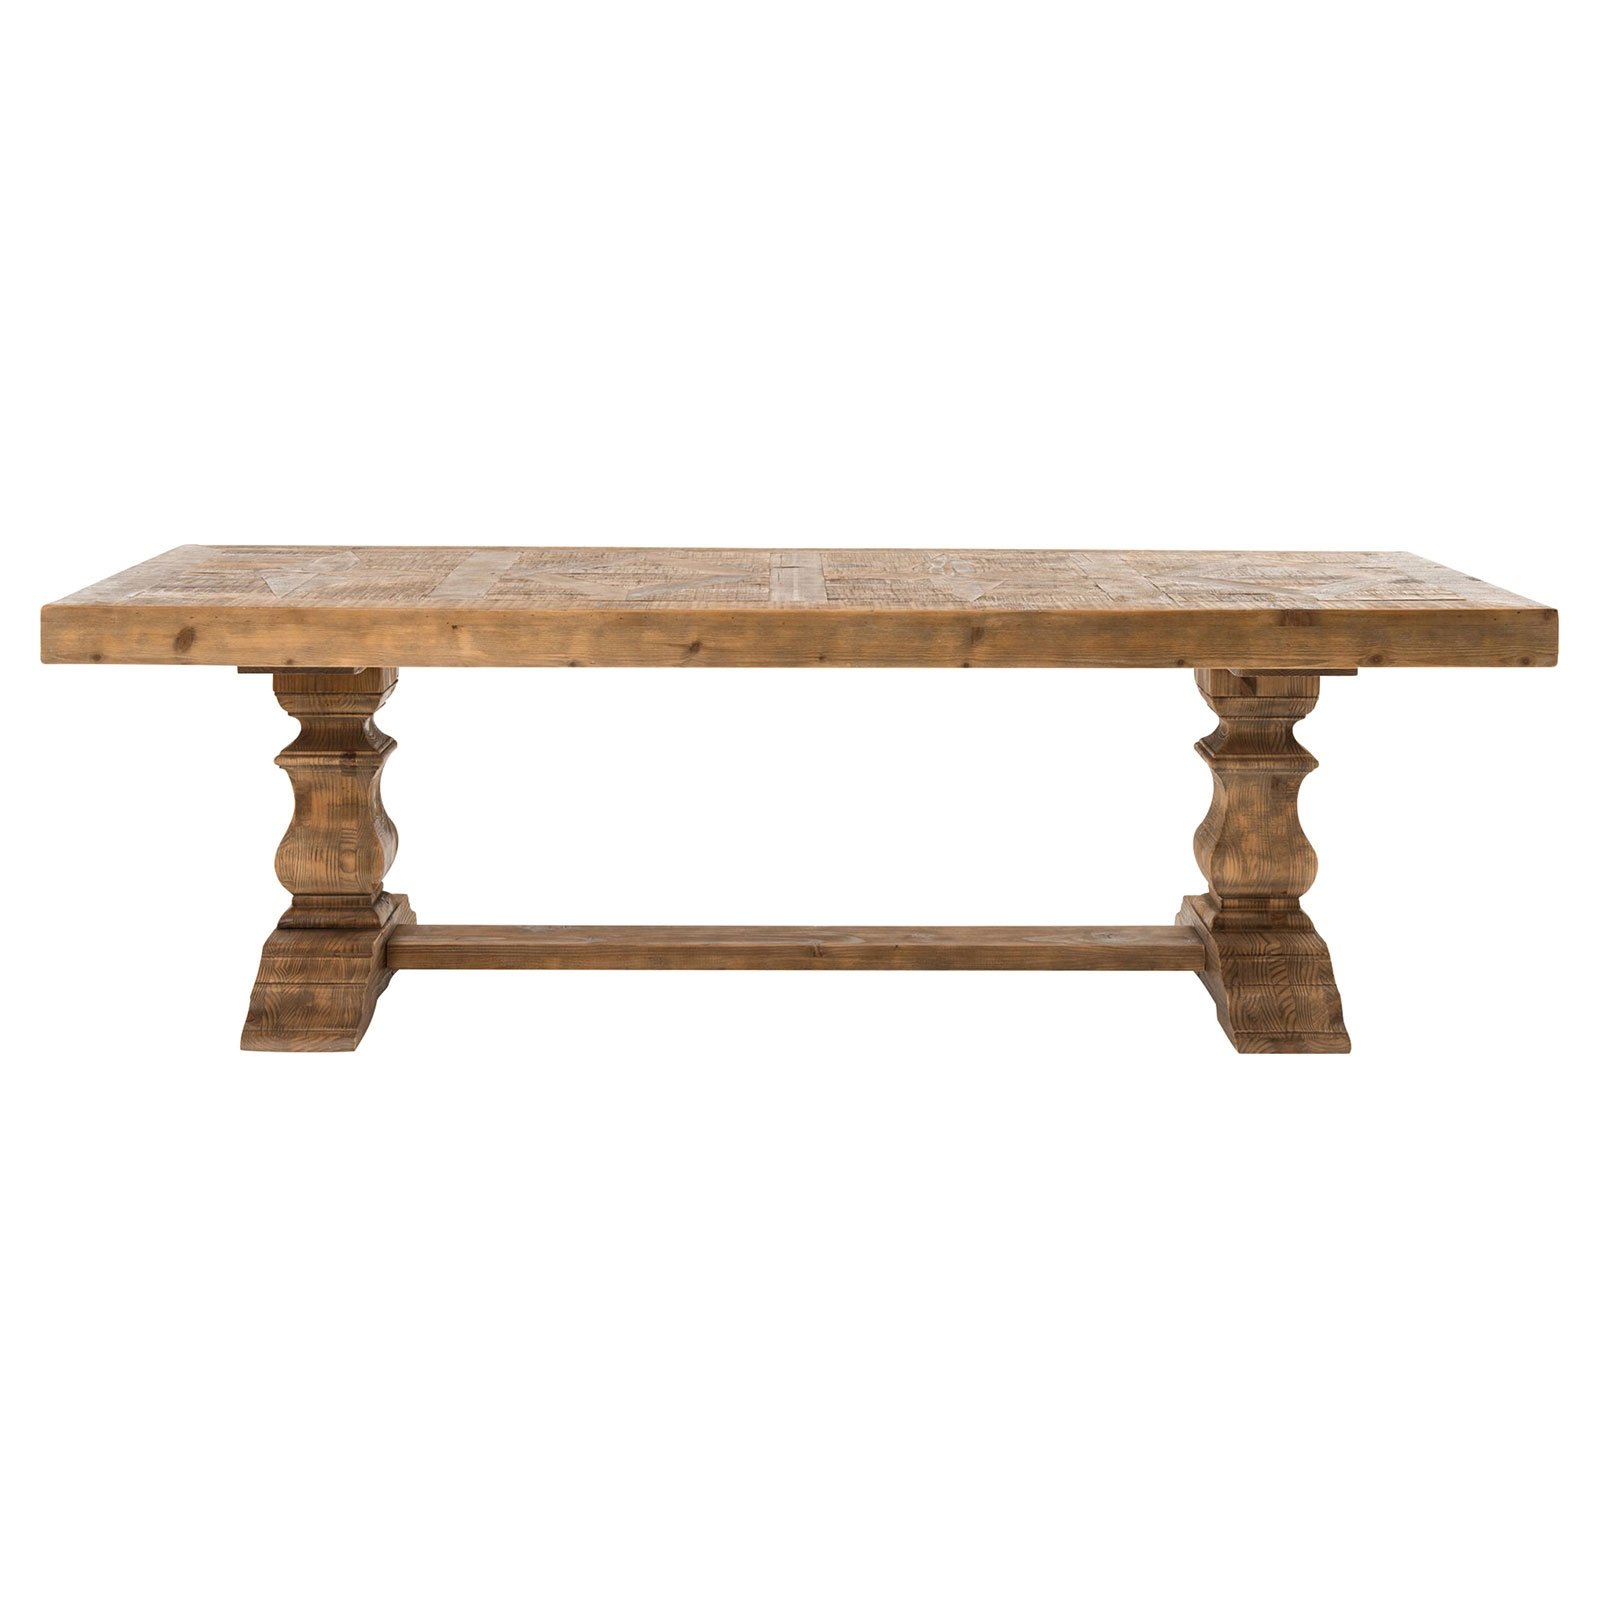 Ellicott Rustic Lodge Bleached Pine Trestle Dining Table - Image 1